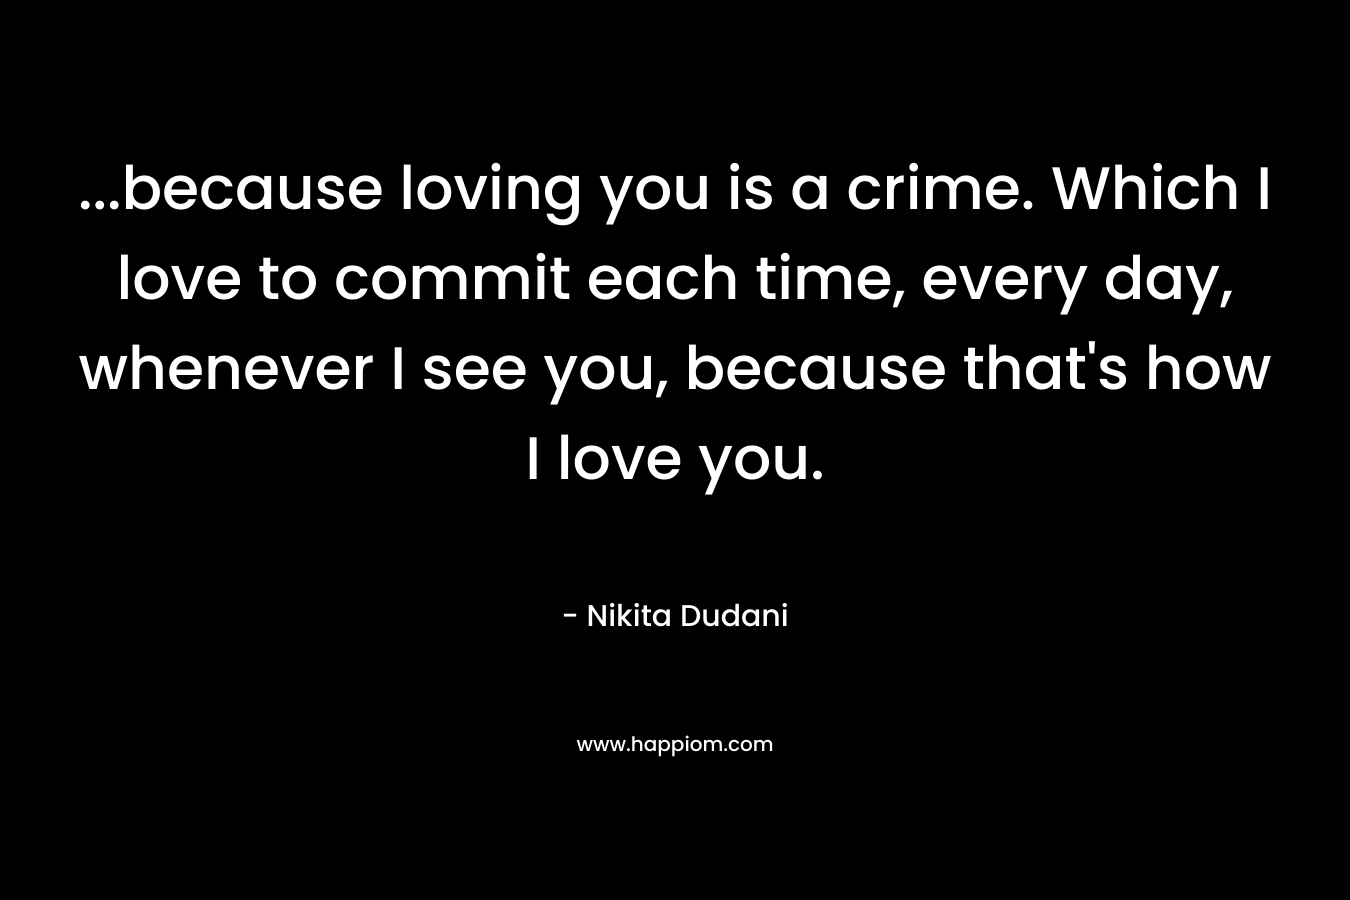 …because loving you is a crime. Which I love to commit each time, every day, whenever I see you, because that’s how I love you. – Nikita Dudani